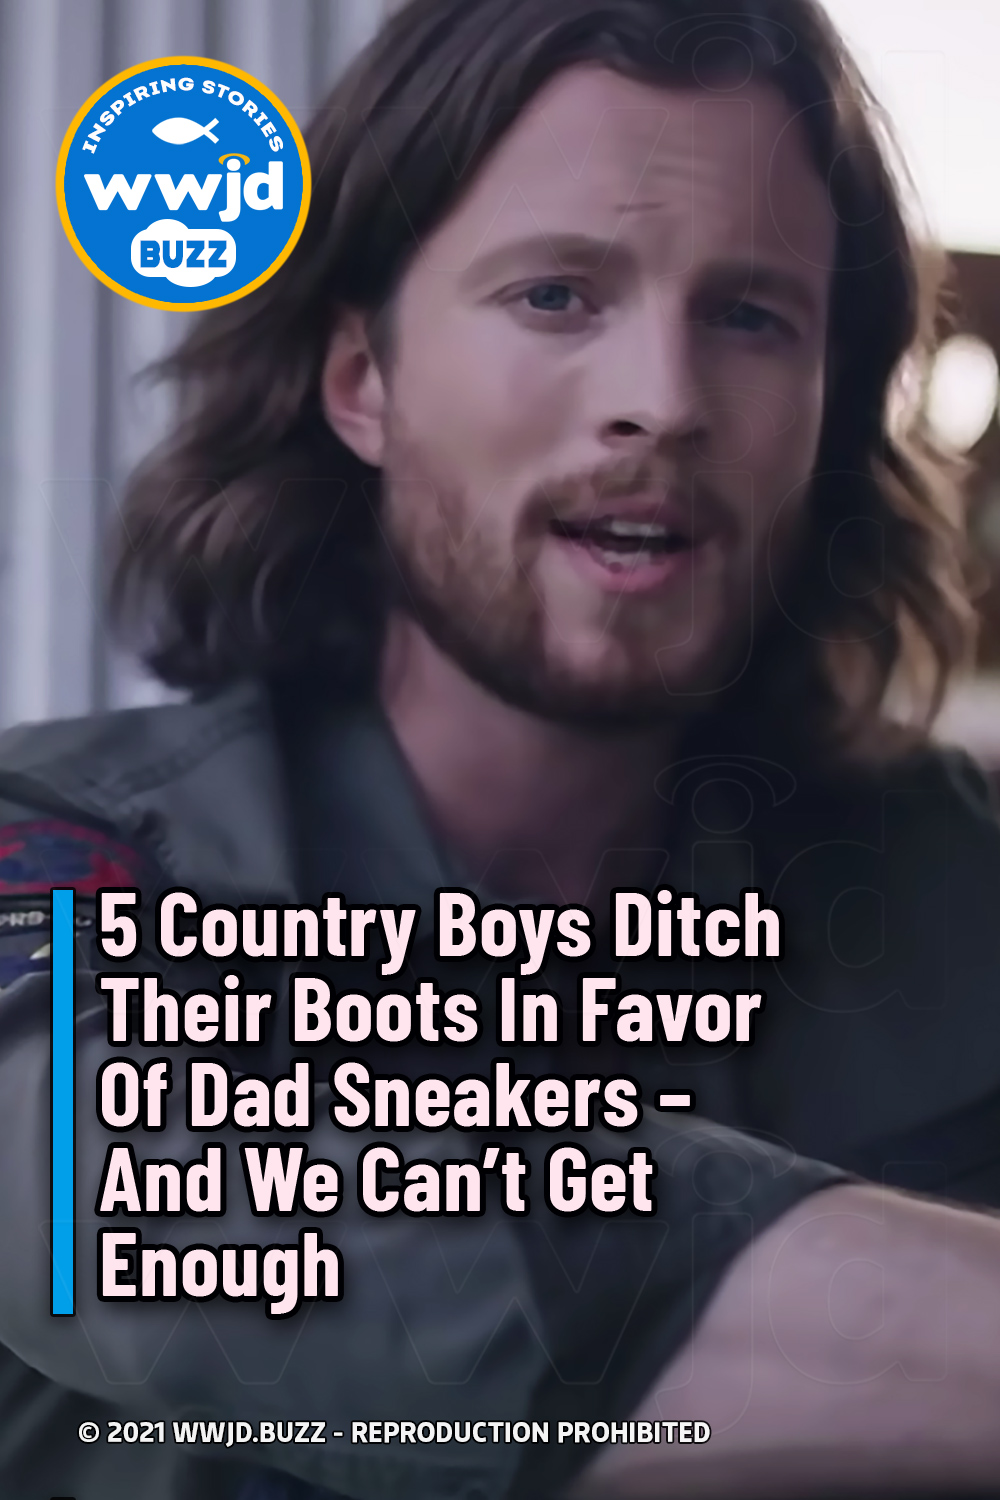 5 Country Boys Ditch Their Boots In Favor Of Dad Sneakers - And We Can’t Get Enough